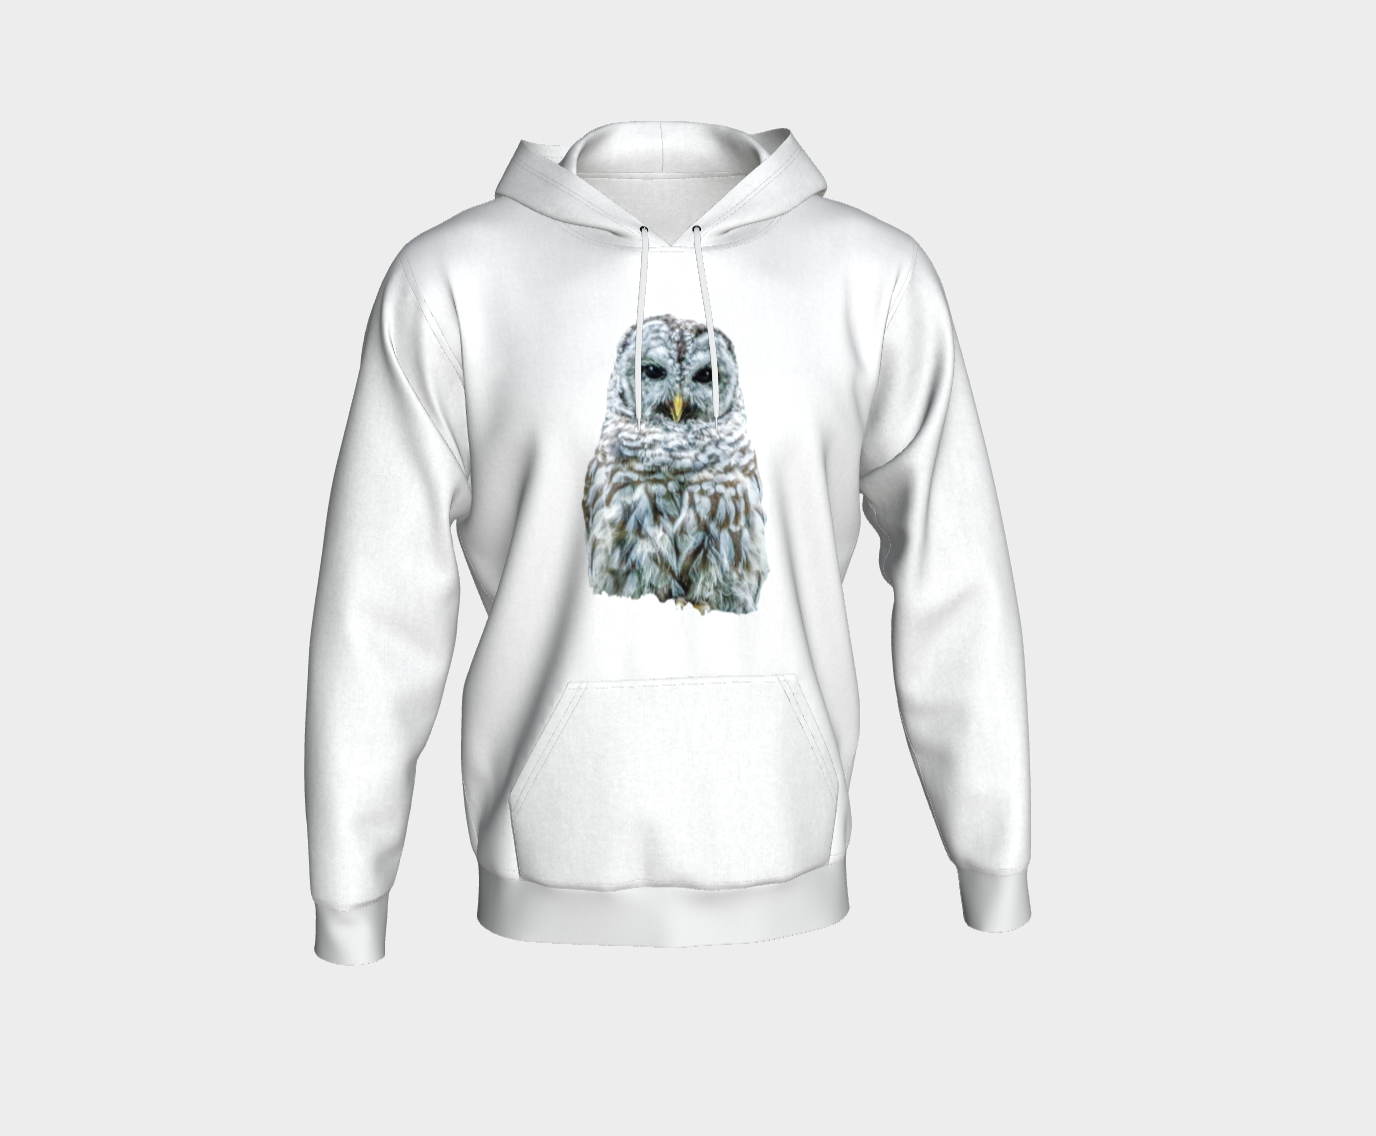 Wise Owl Unisex Pullover Hoodie Your Van Isle Goddess unisex pullover hoodie is a great classic hoodie!  Created with state of the art tri-tex material which is a non-shrink poly middle encased in two layers of ultra soft cotton face and lining.